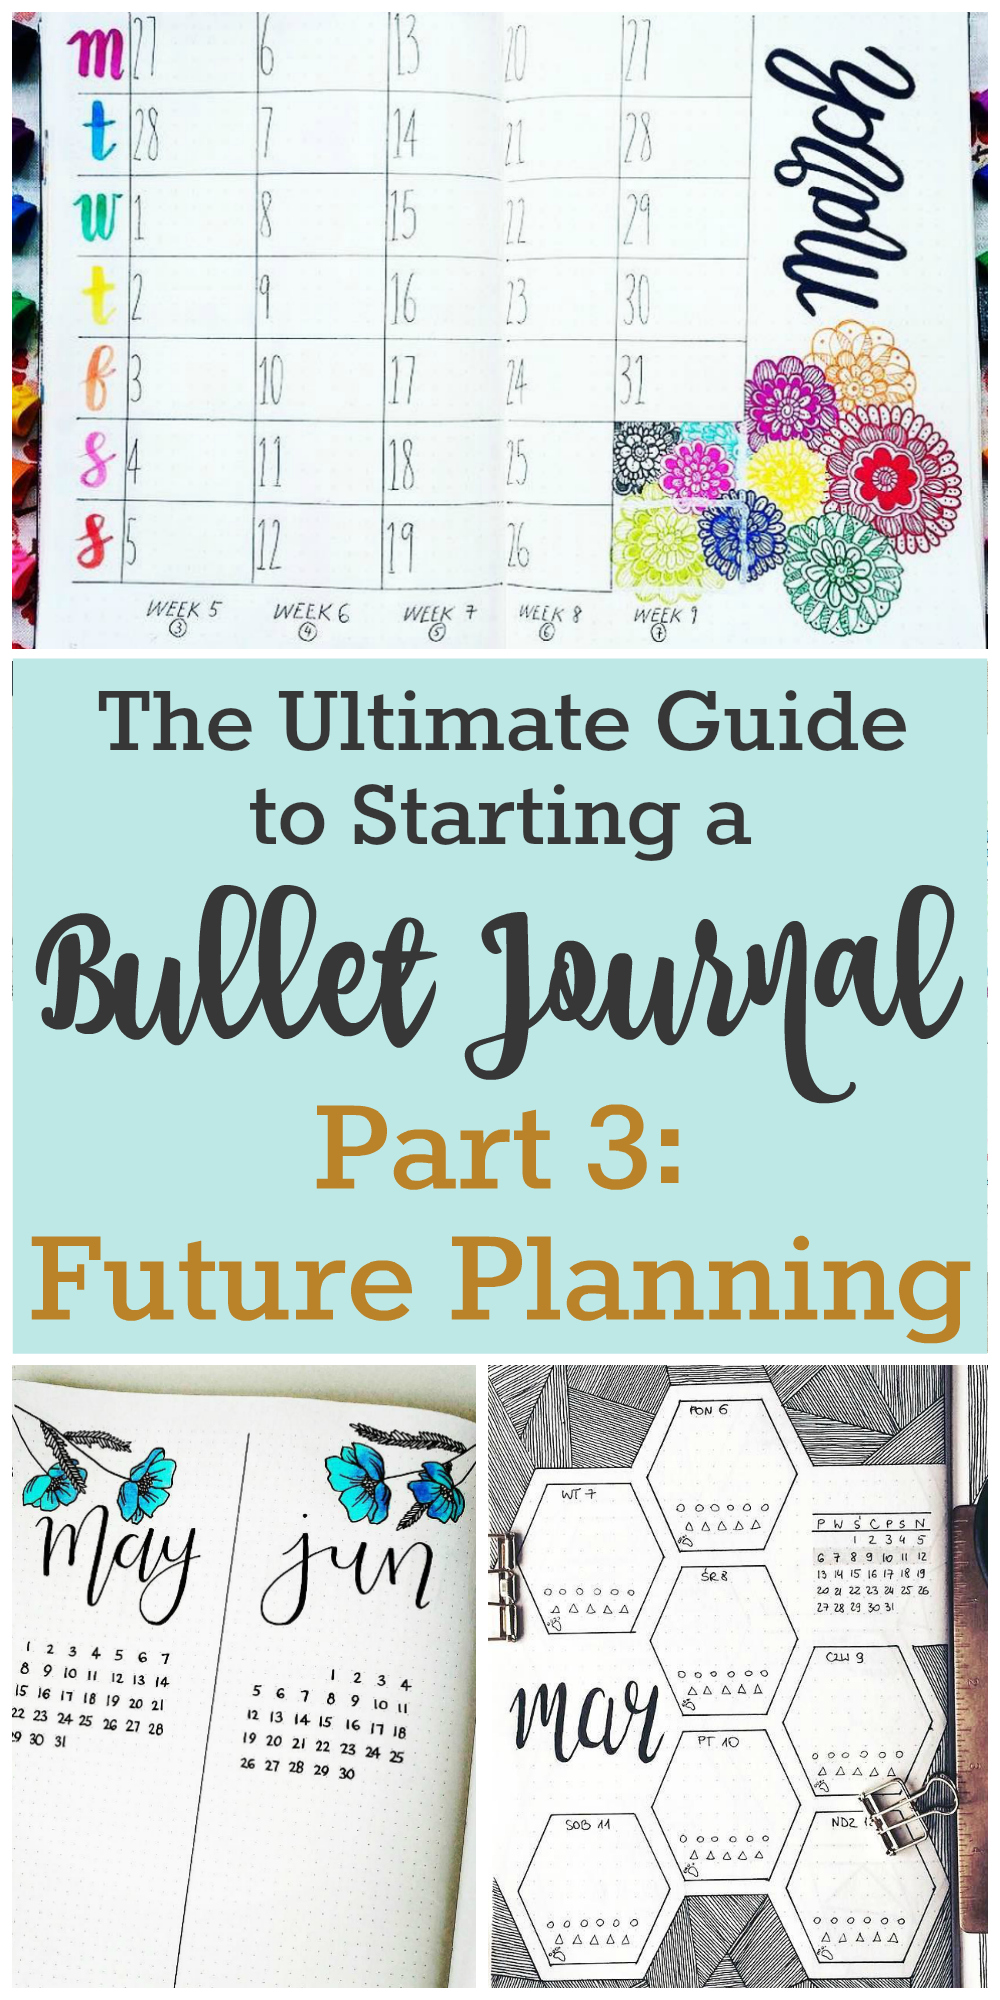 Plan Your Future in your Bullet Journal